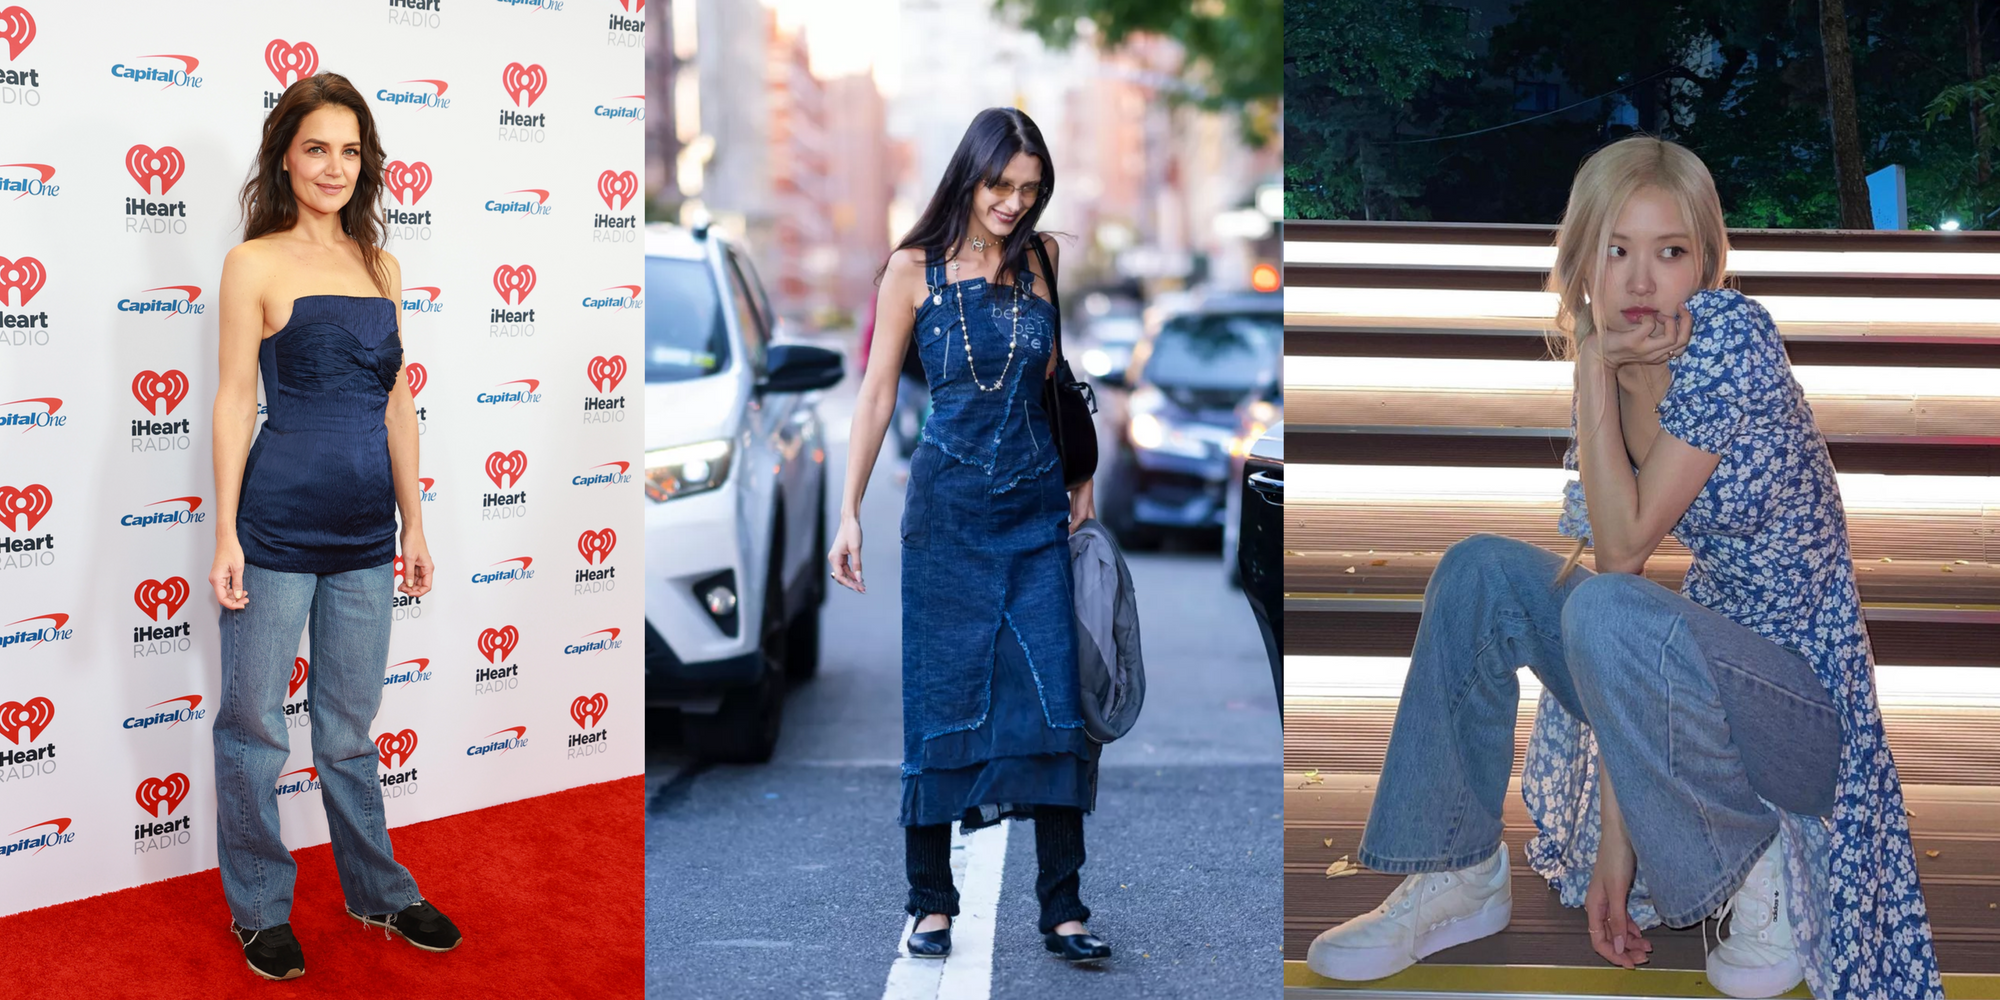 Dresses Over Pants: The Quirky Y2K Trend Is Back